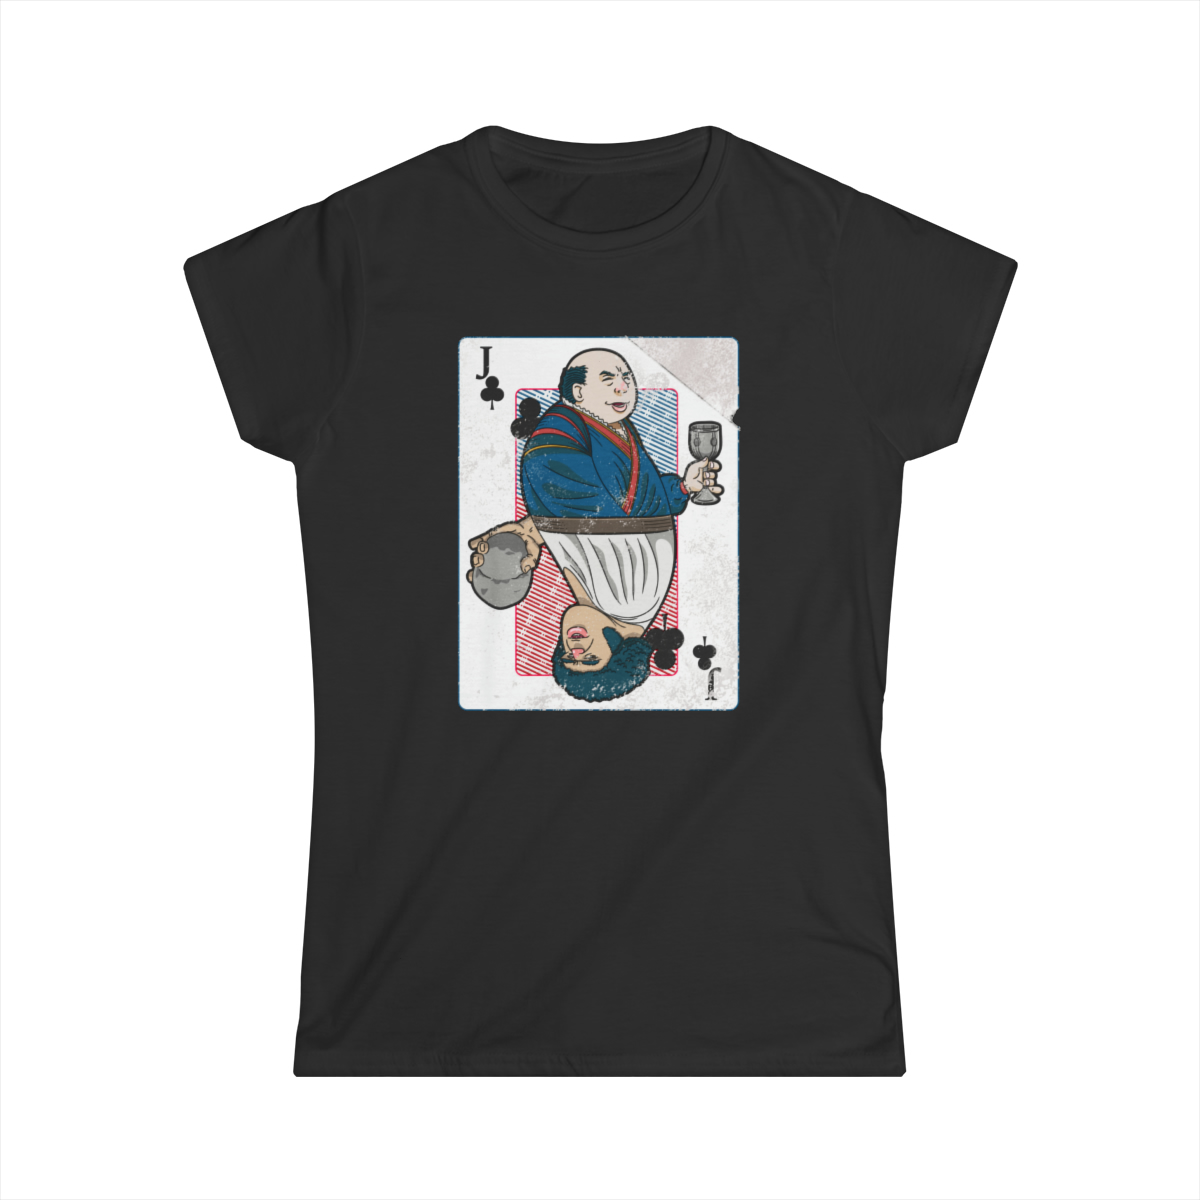 Jack of Clubs - Women's Softstyle Tee